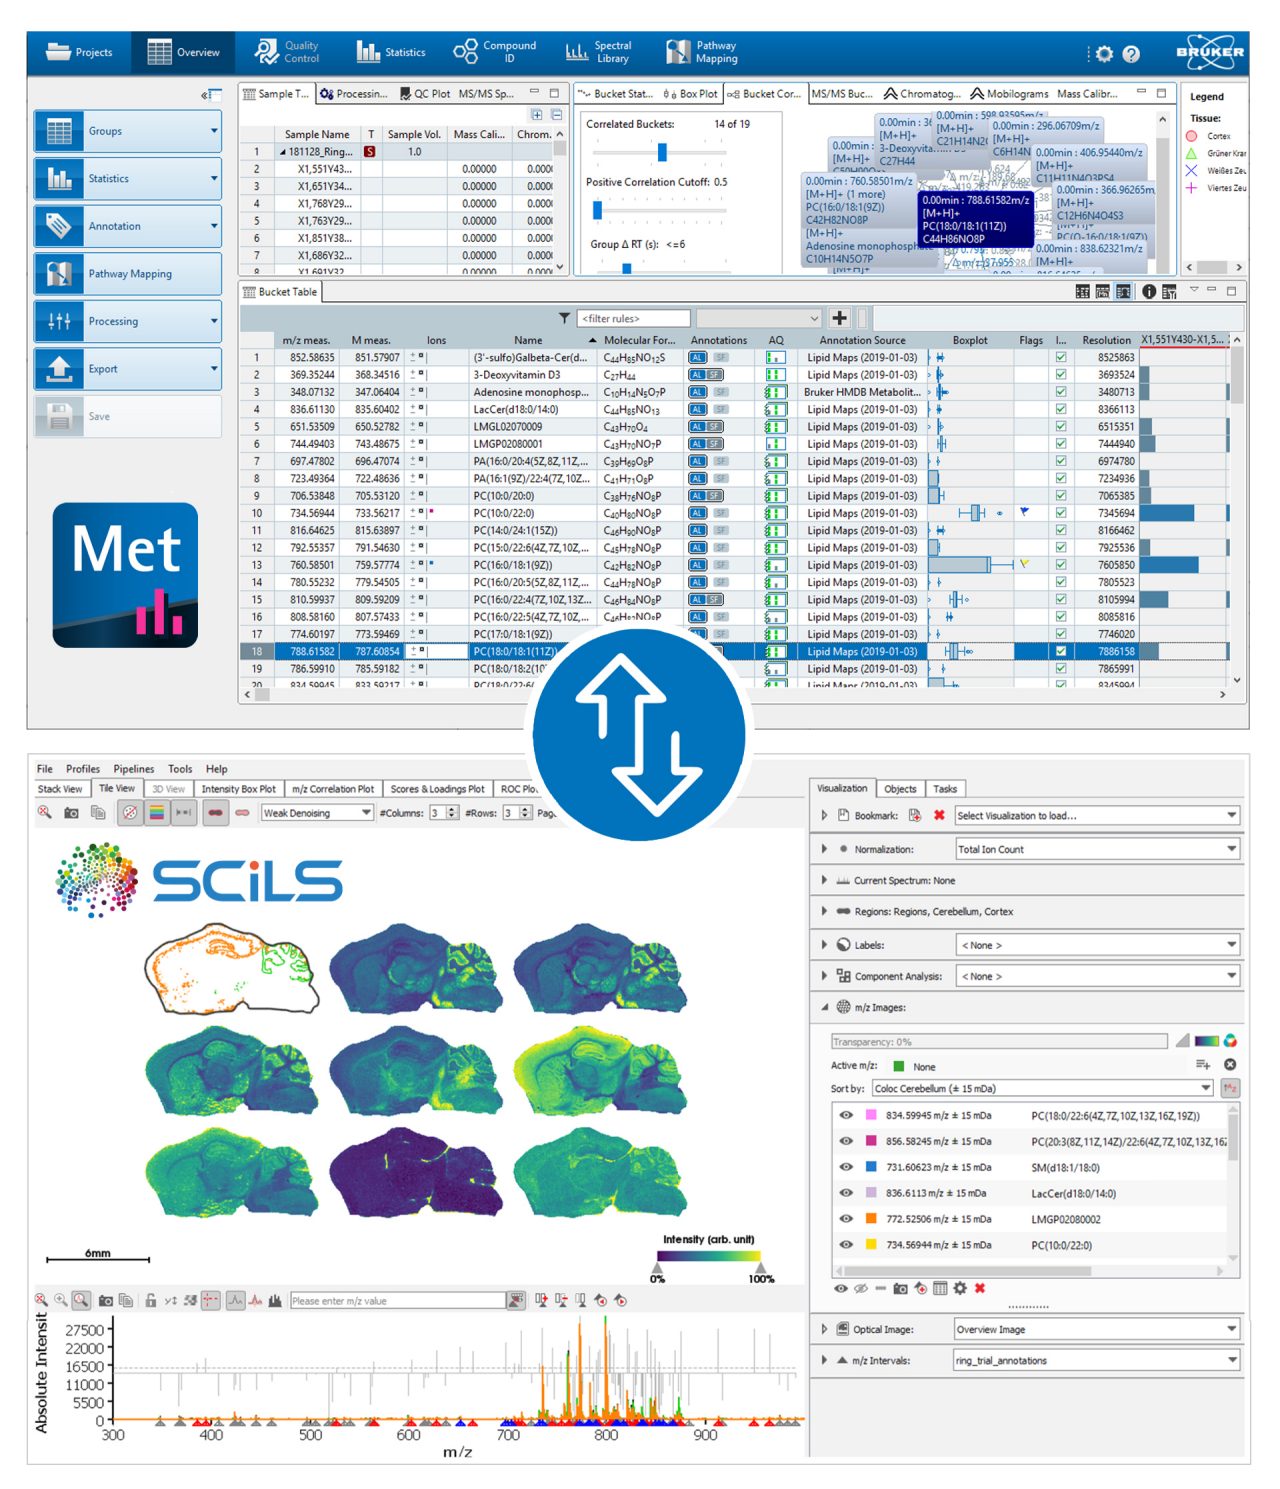 SCiLS™ Lab integrates with the SpatialOMx® workflow from MetaboScape® and visualizes the annotated MALDI molecular tissue images of detected features (metabolites, lipids, glycans).